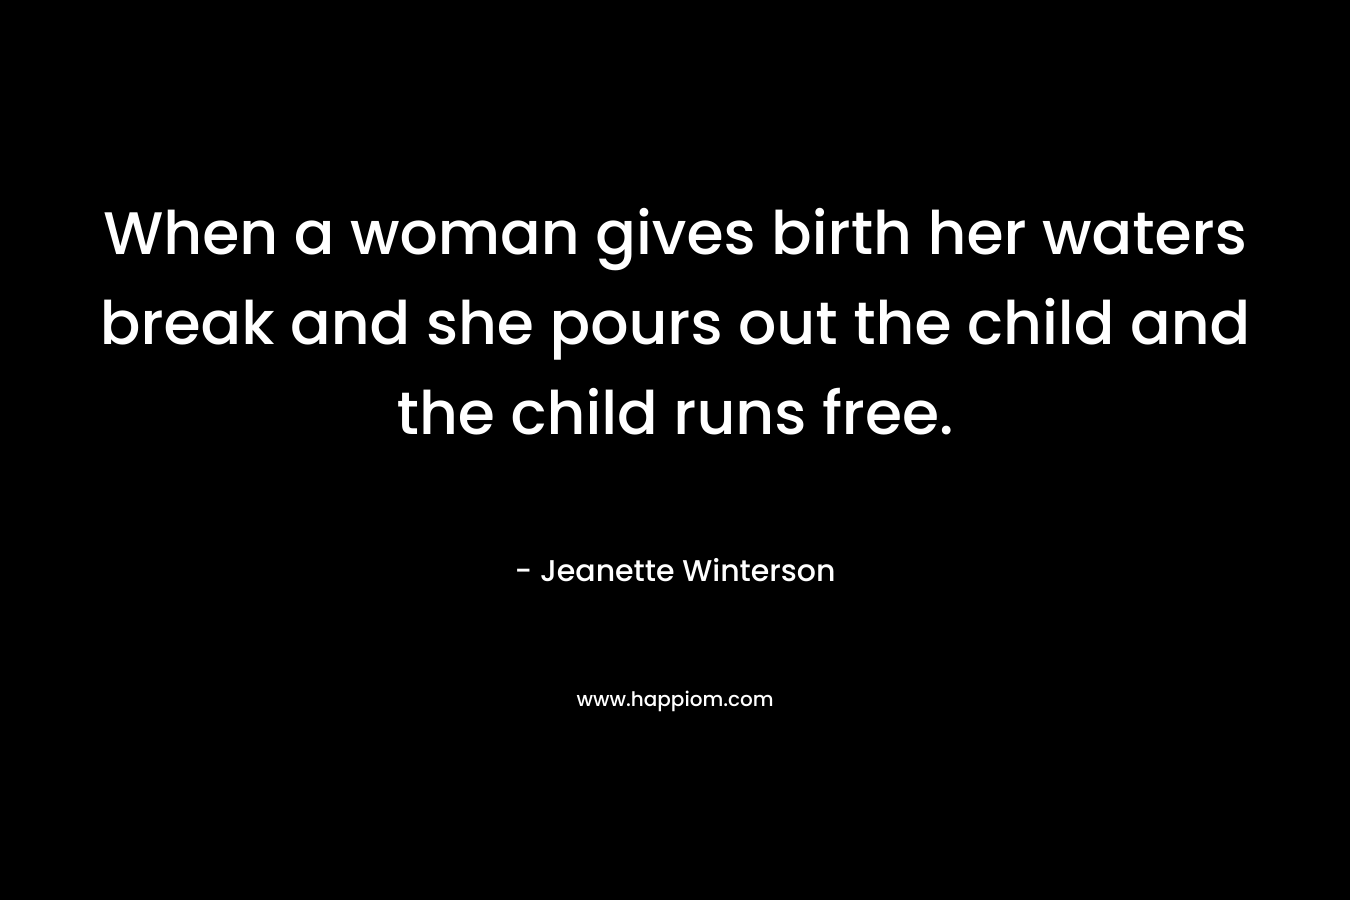 When a woman gives birth her waters break and she pours out the child and the child runs free. – Jeanette Winterson